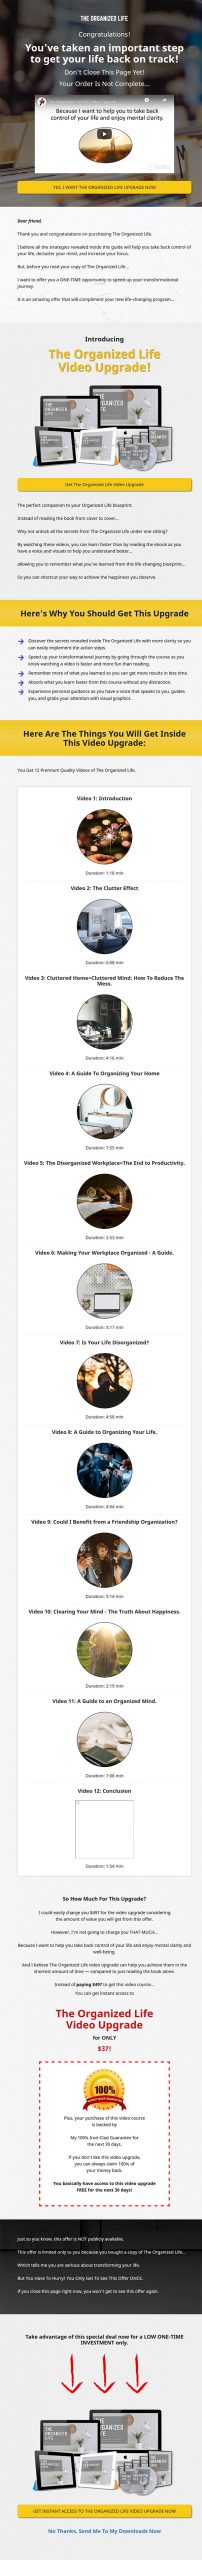 The Organized Life Ebook and Videos MRR